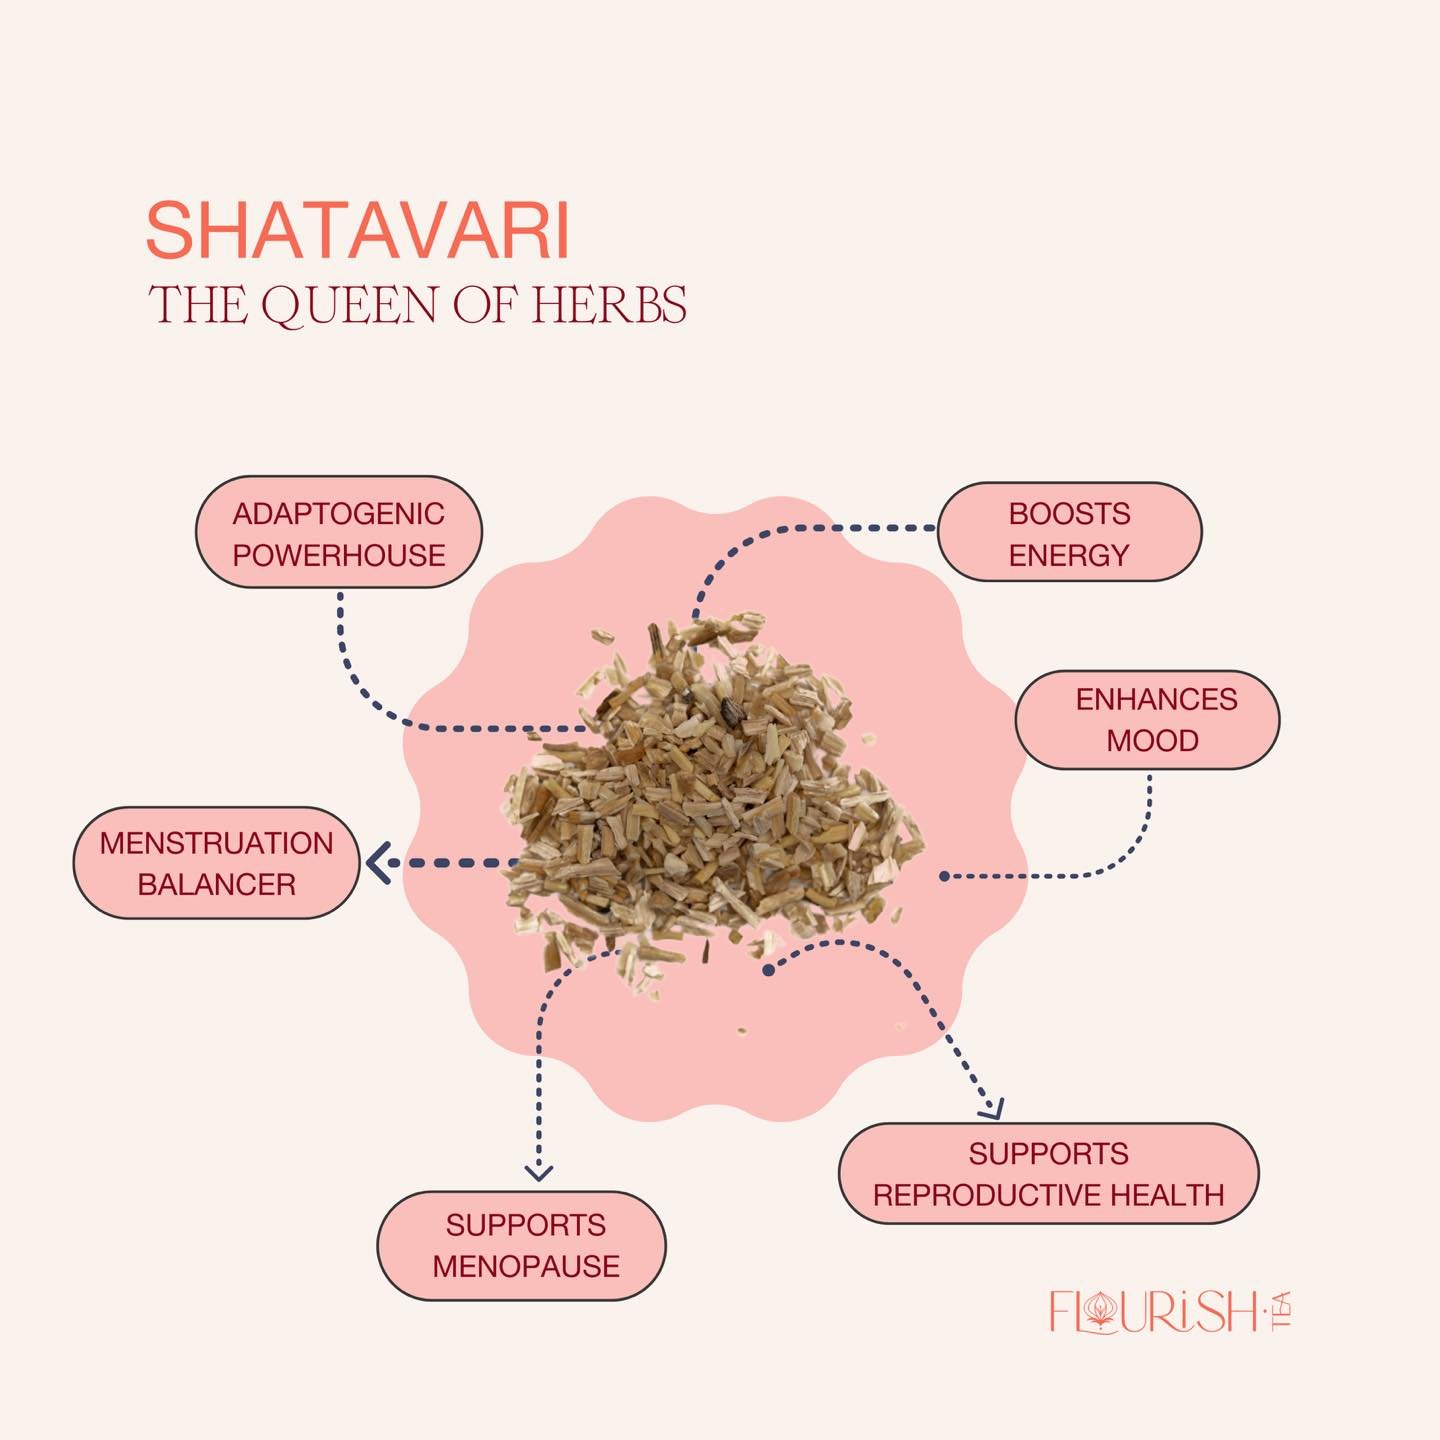 Herb for the W O M B ✨

Shatavari the &lsquo;Queen of Herbs&rsquo; has been used for centuries as a hormone balancer and a general tonic to uplift female health and libido. ⚖️

Being a powerful adaptogenic herb, it is known to relieve one from physic